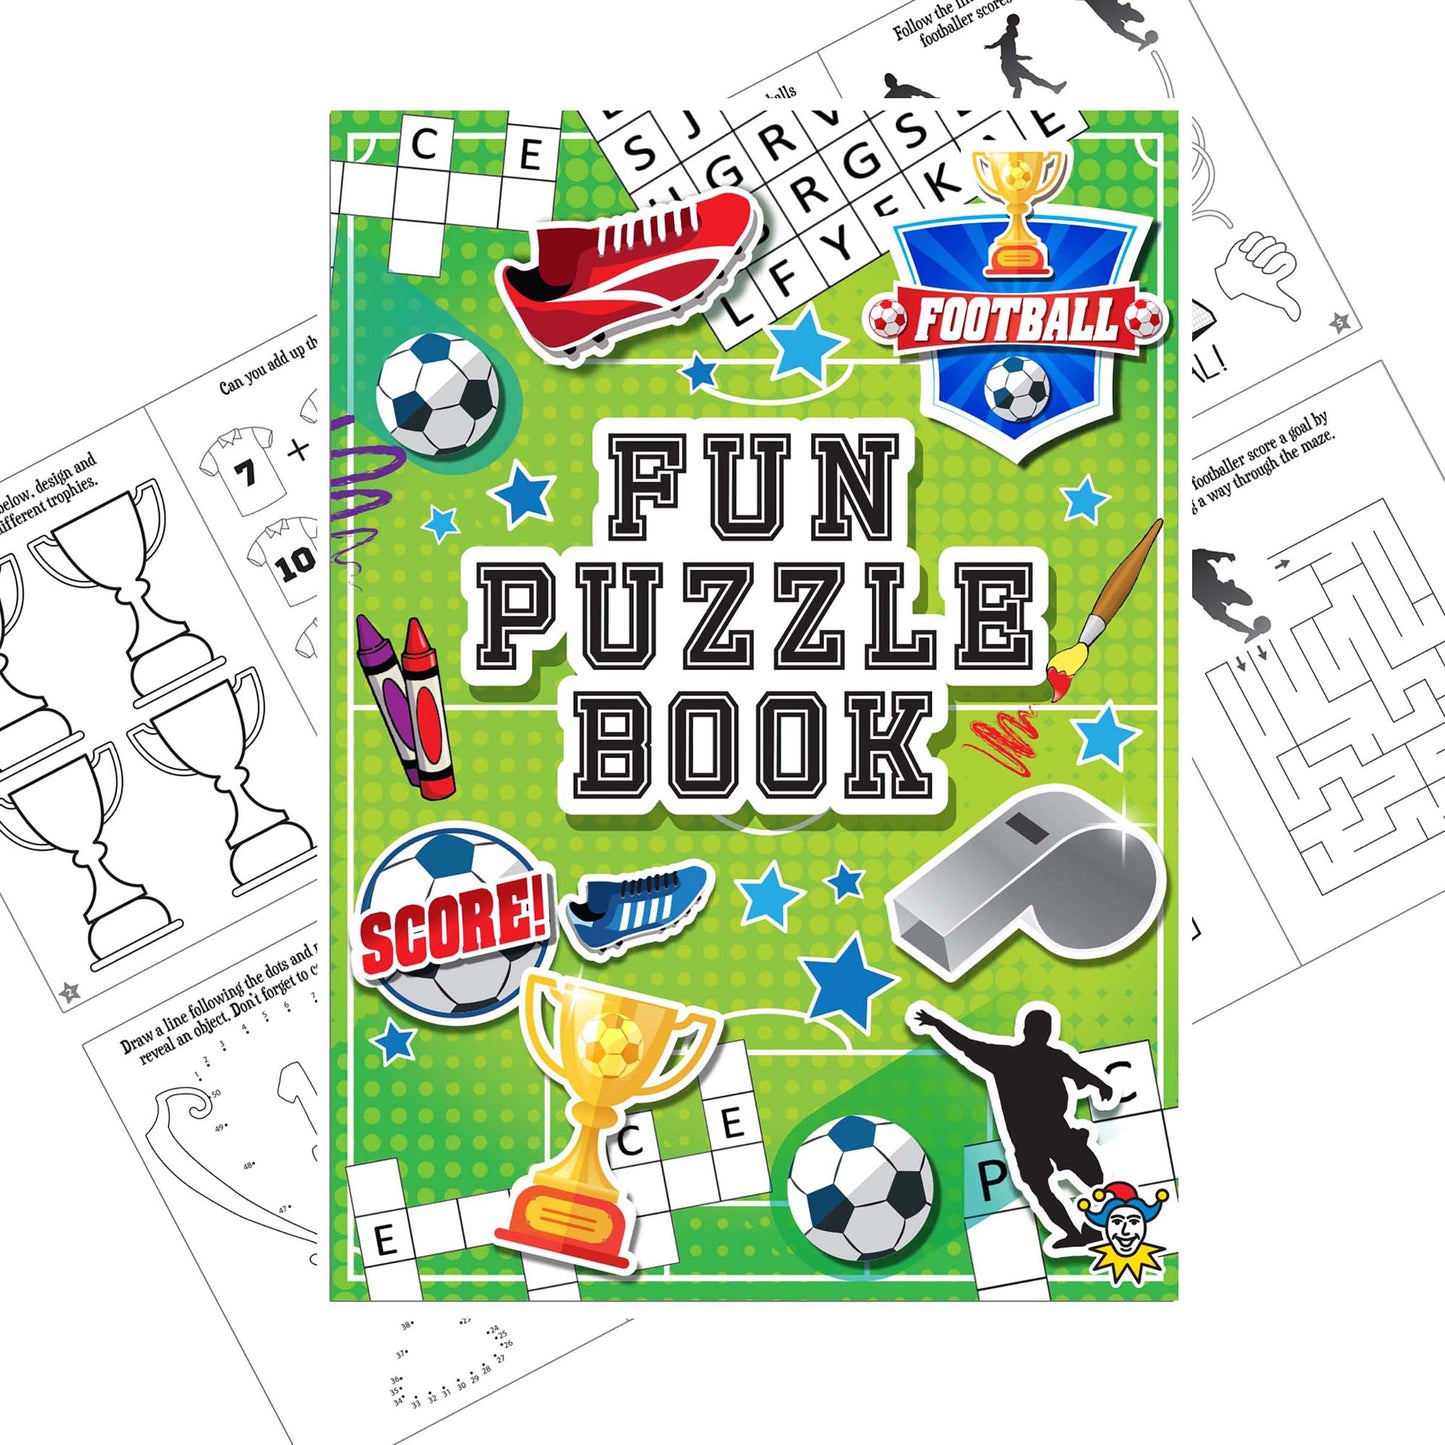 Football Puzzle Book